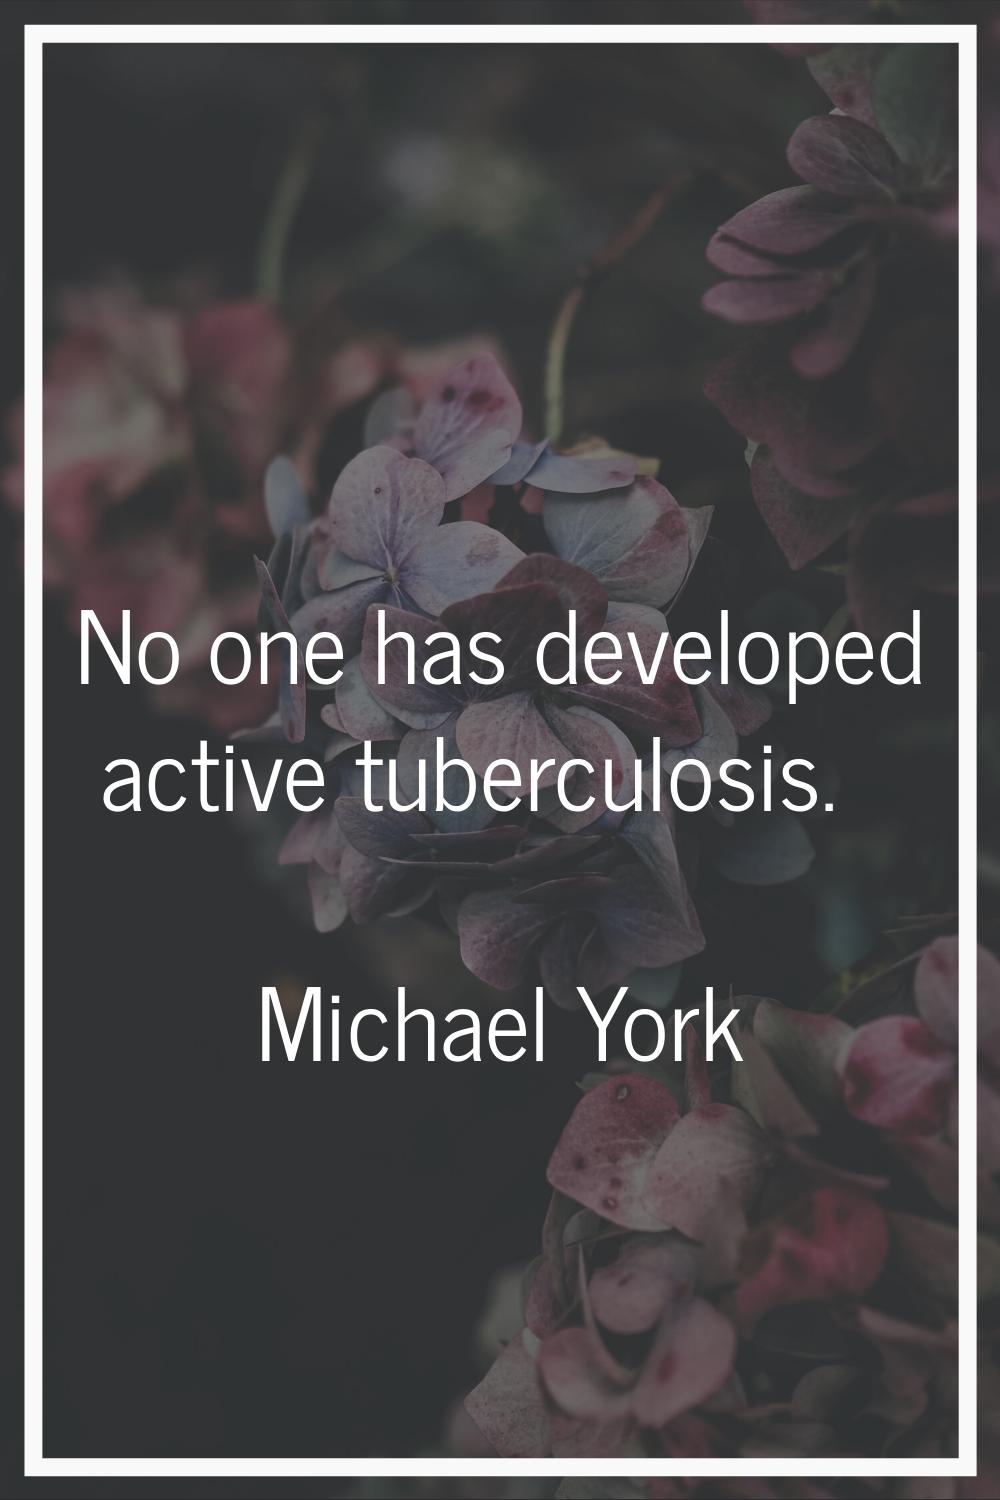 No one has developed active tuberculosis.